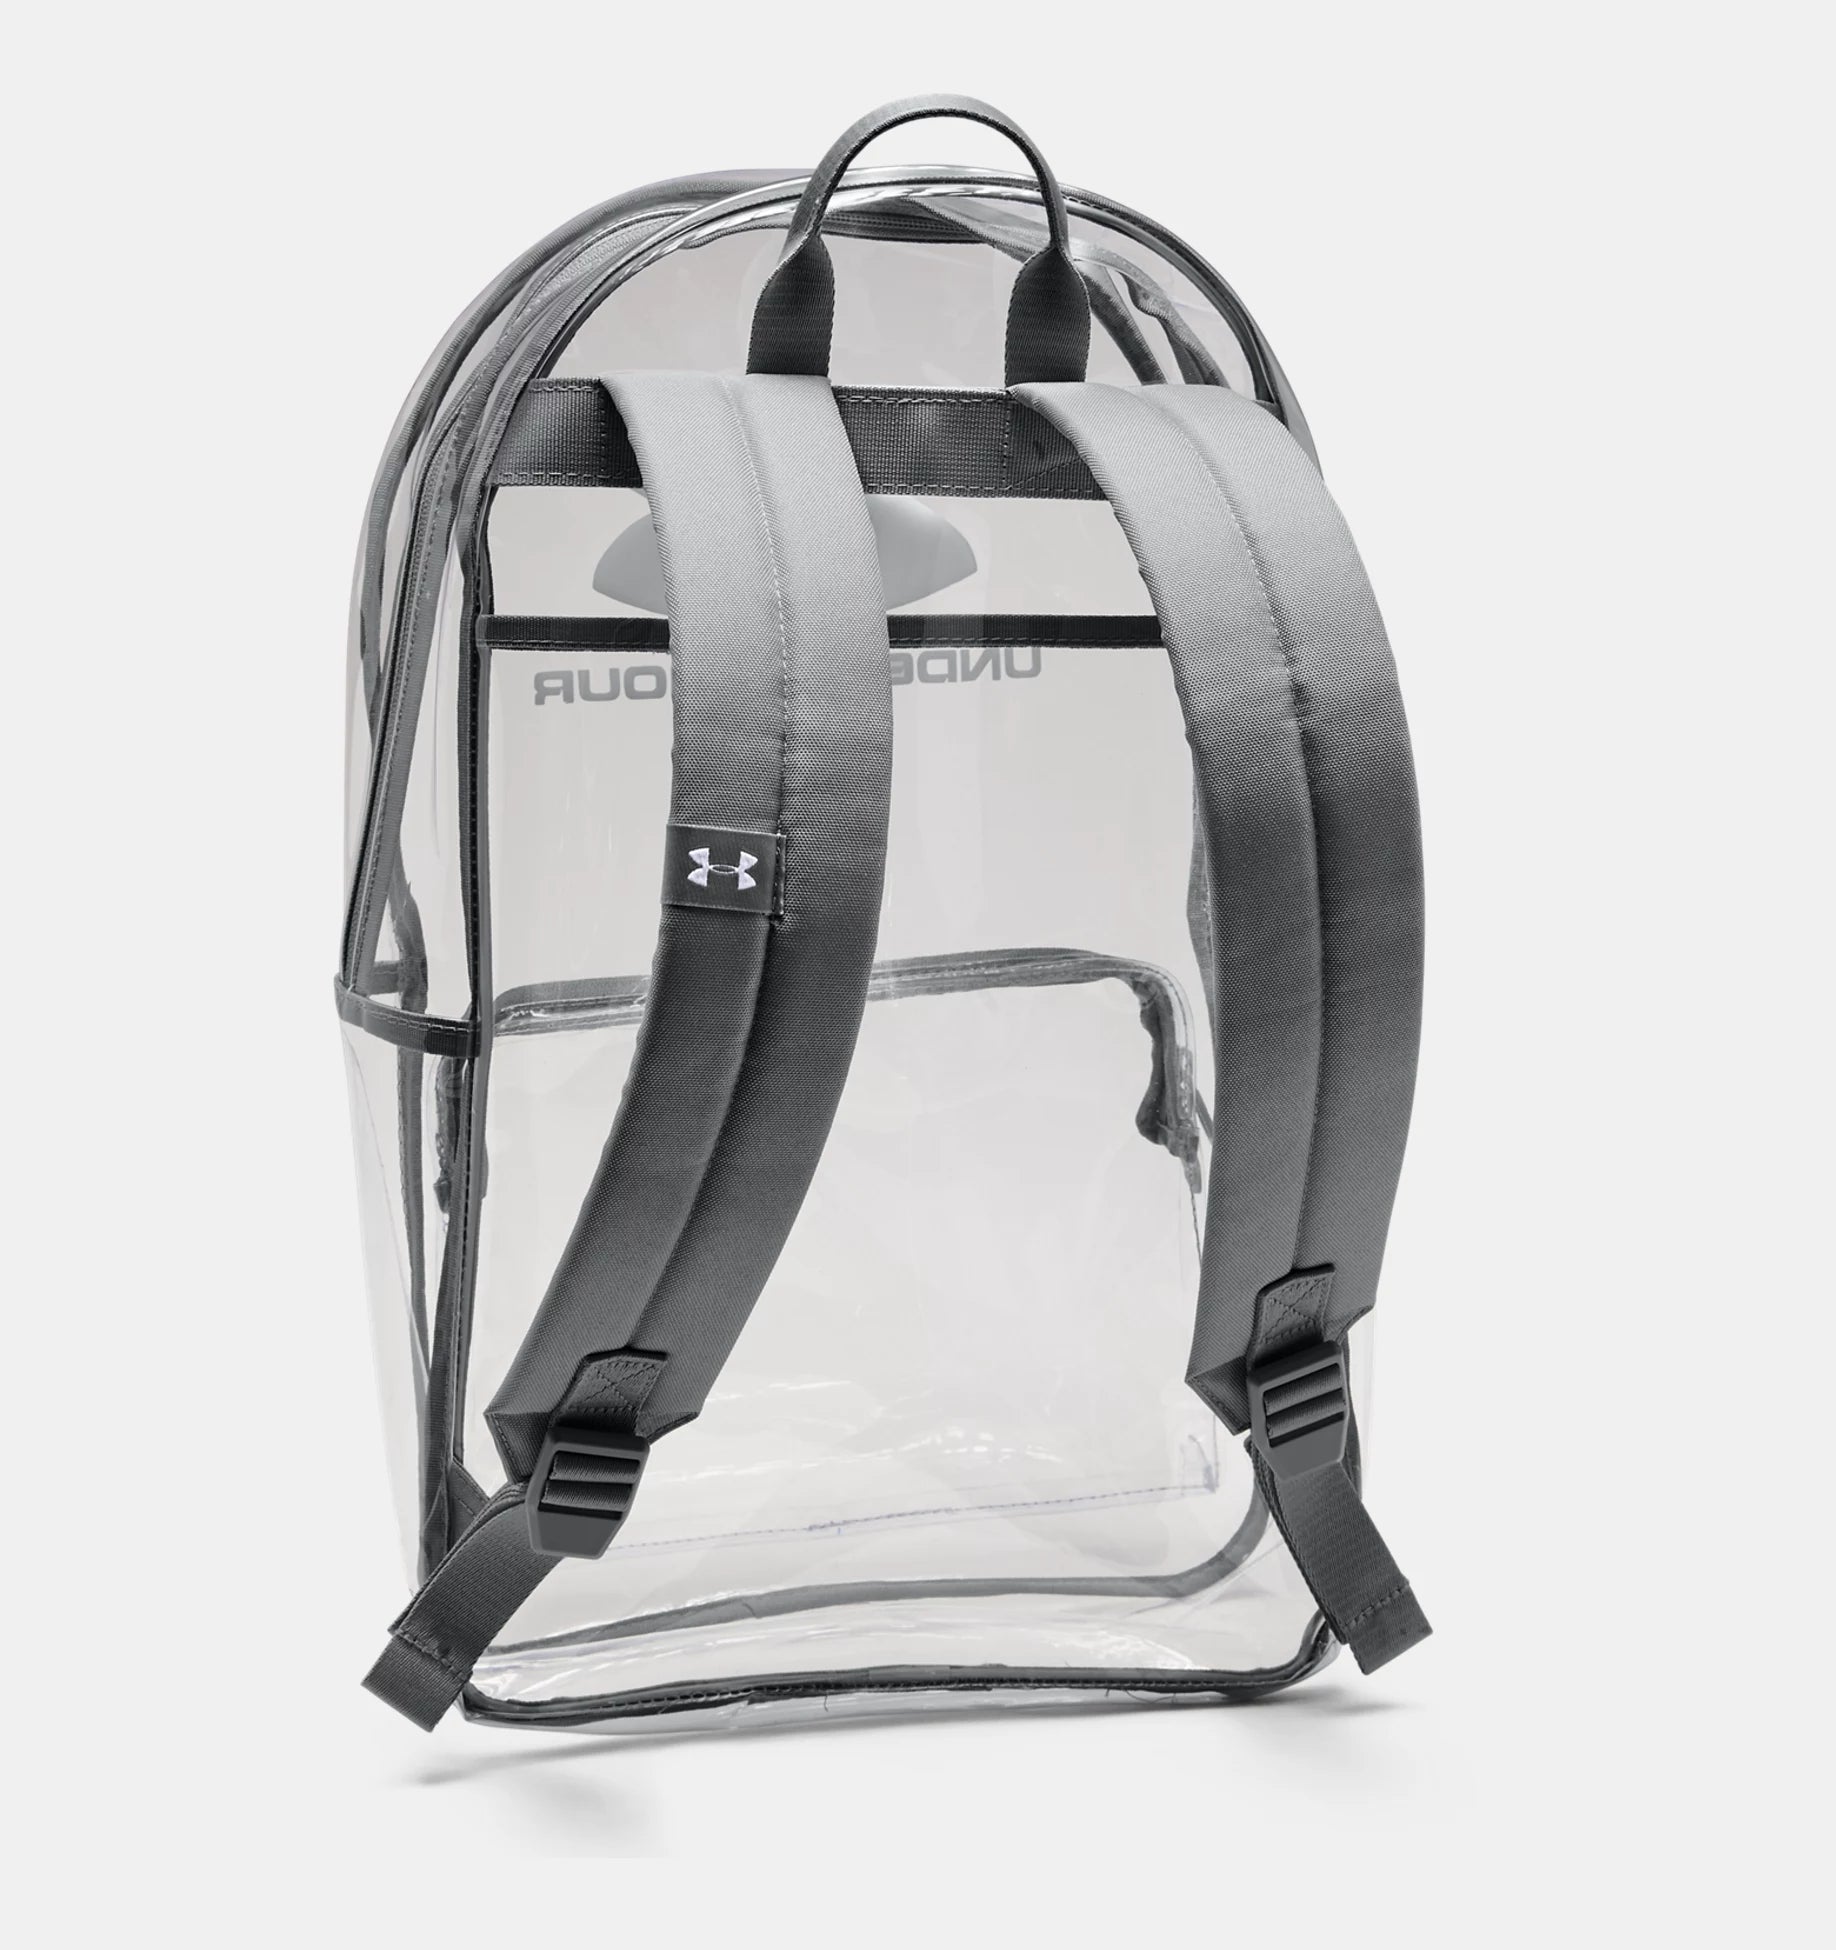 Under Armour Clear Backpack 1352118 - Newest Products